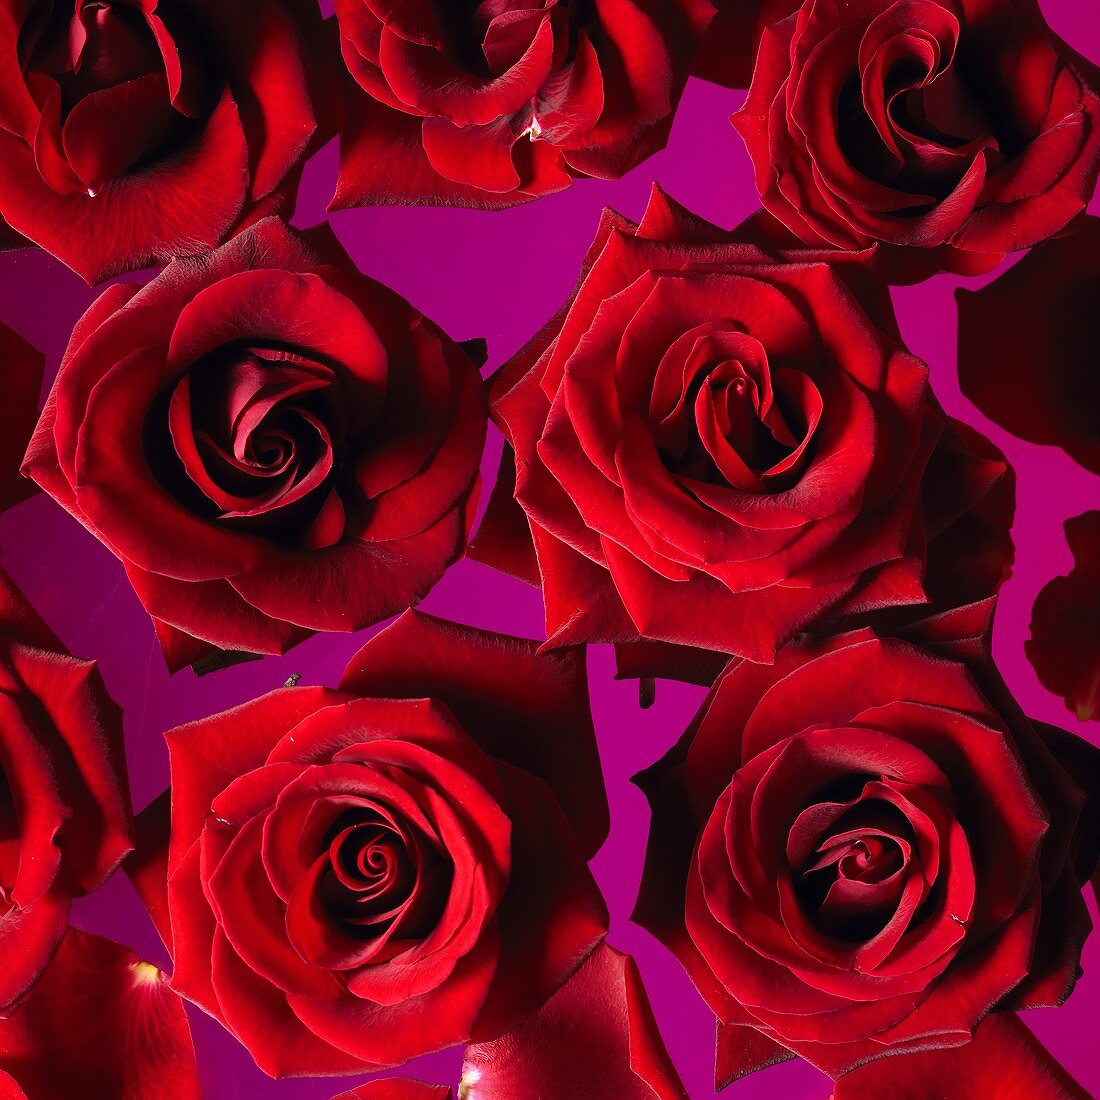 Red roses on a pink surface